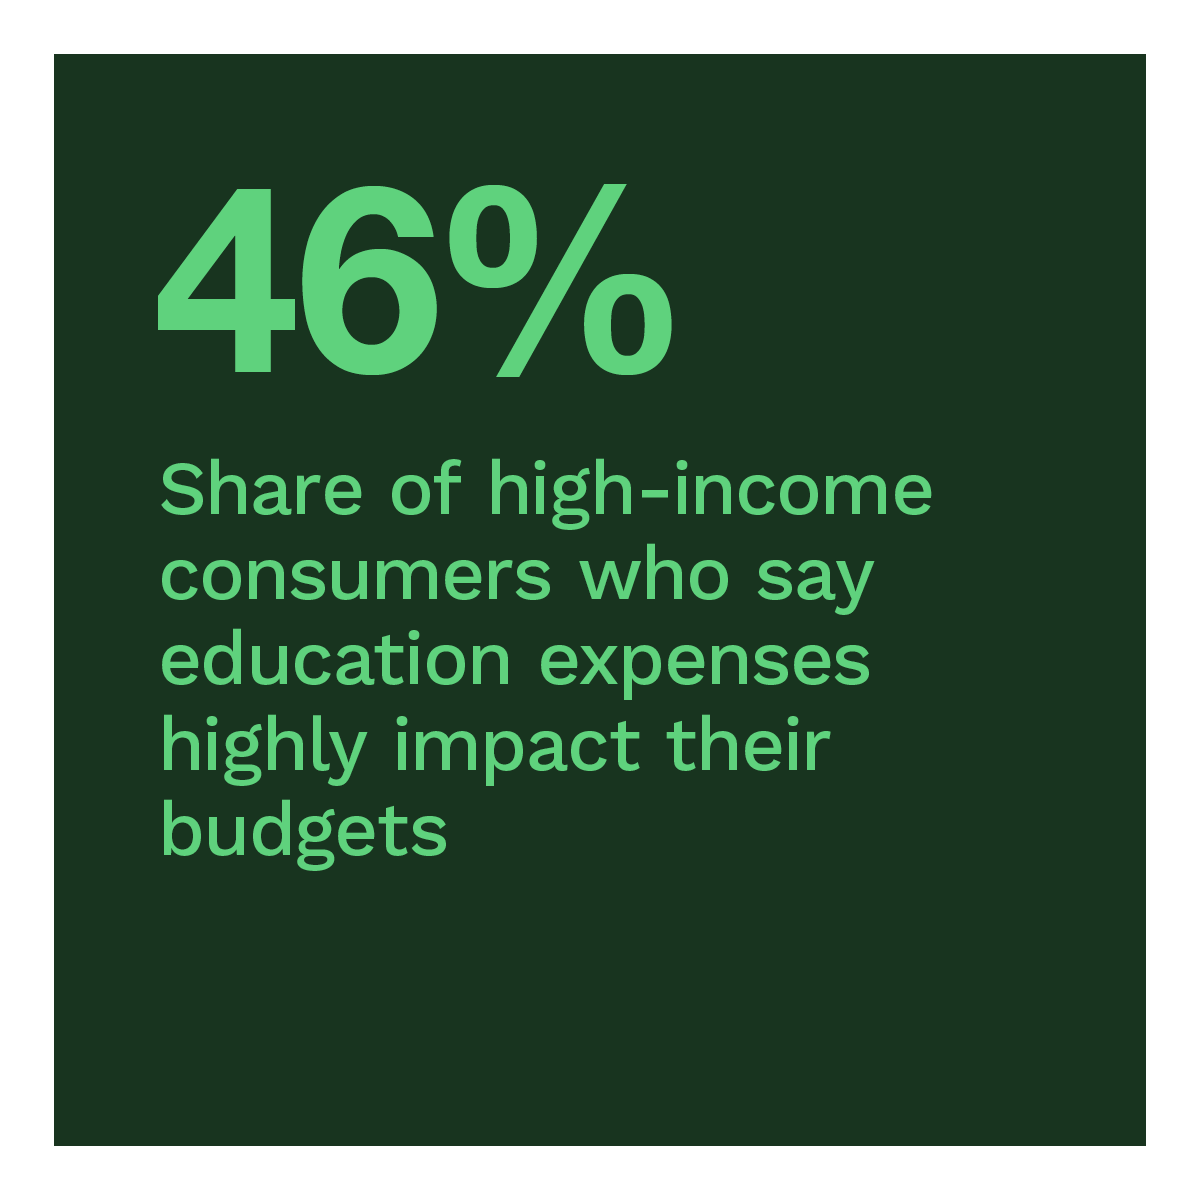 46%: Share of high-income consumers who say education expenses highly impact their budgets